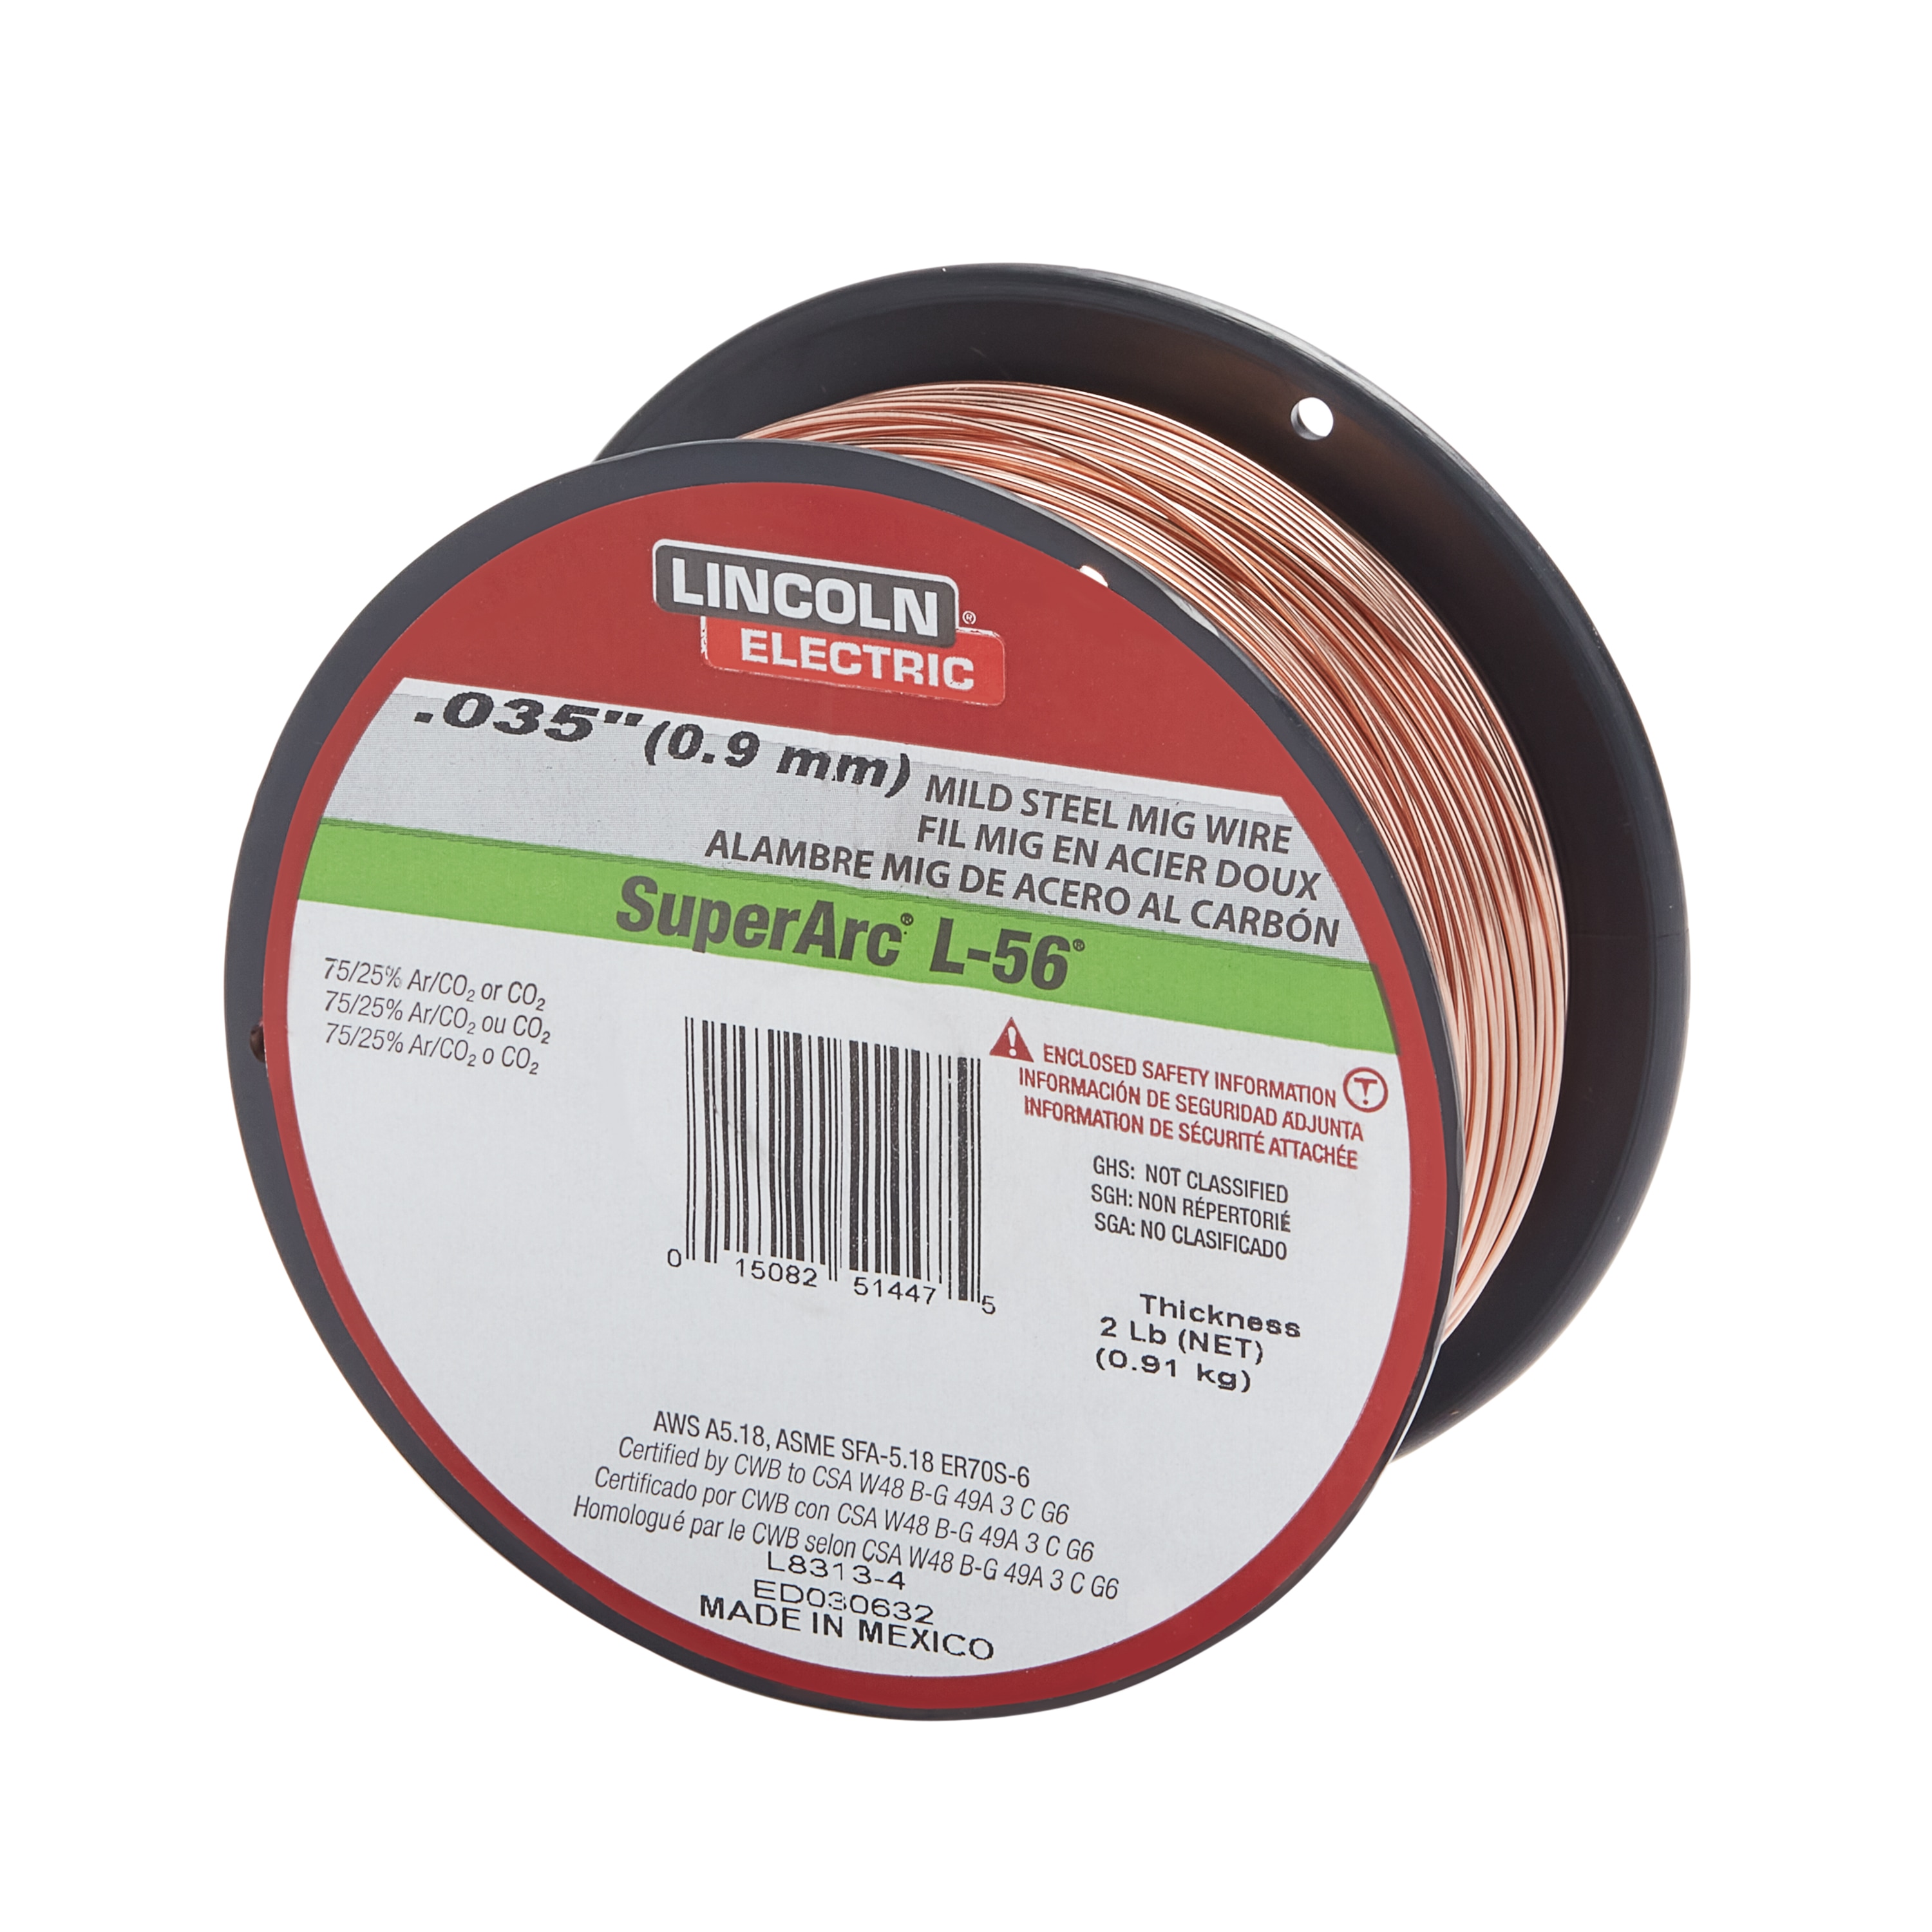 RoadPro 16-Gauge 25' All Purpose Electrical Wire, Spool